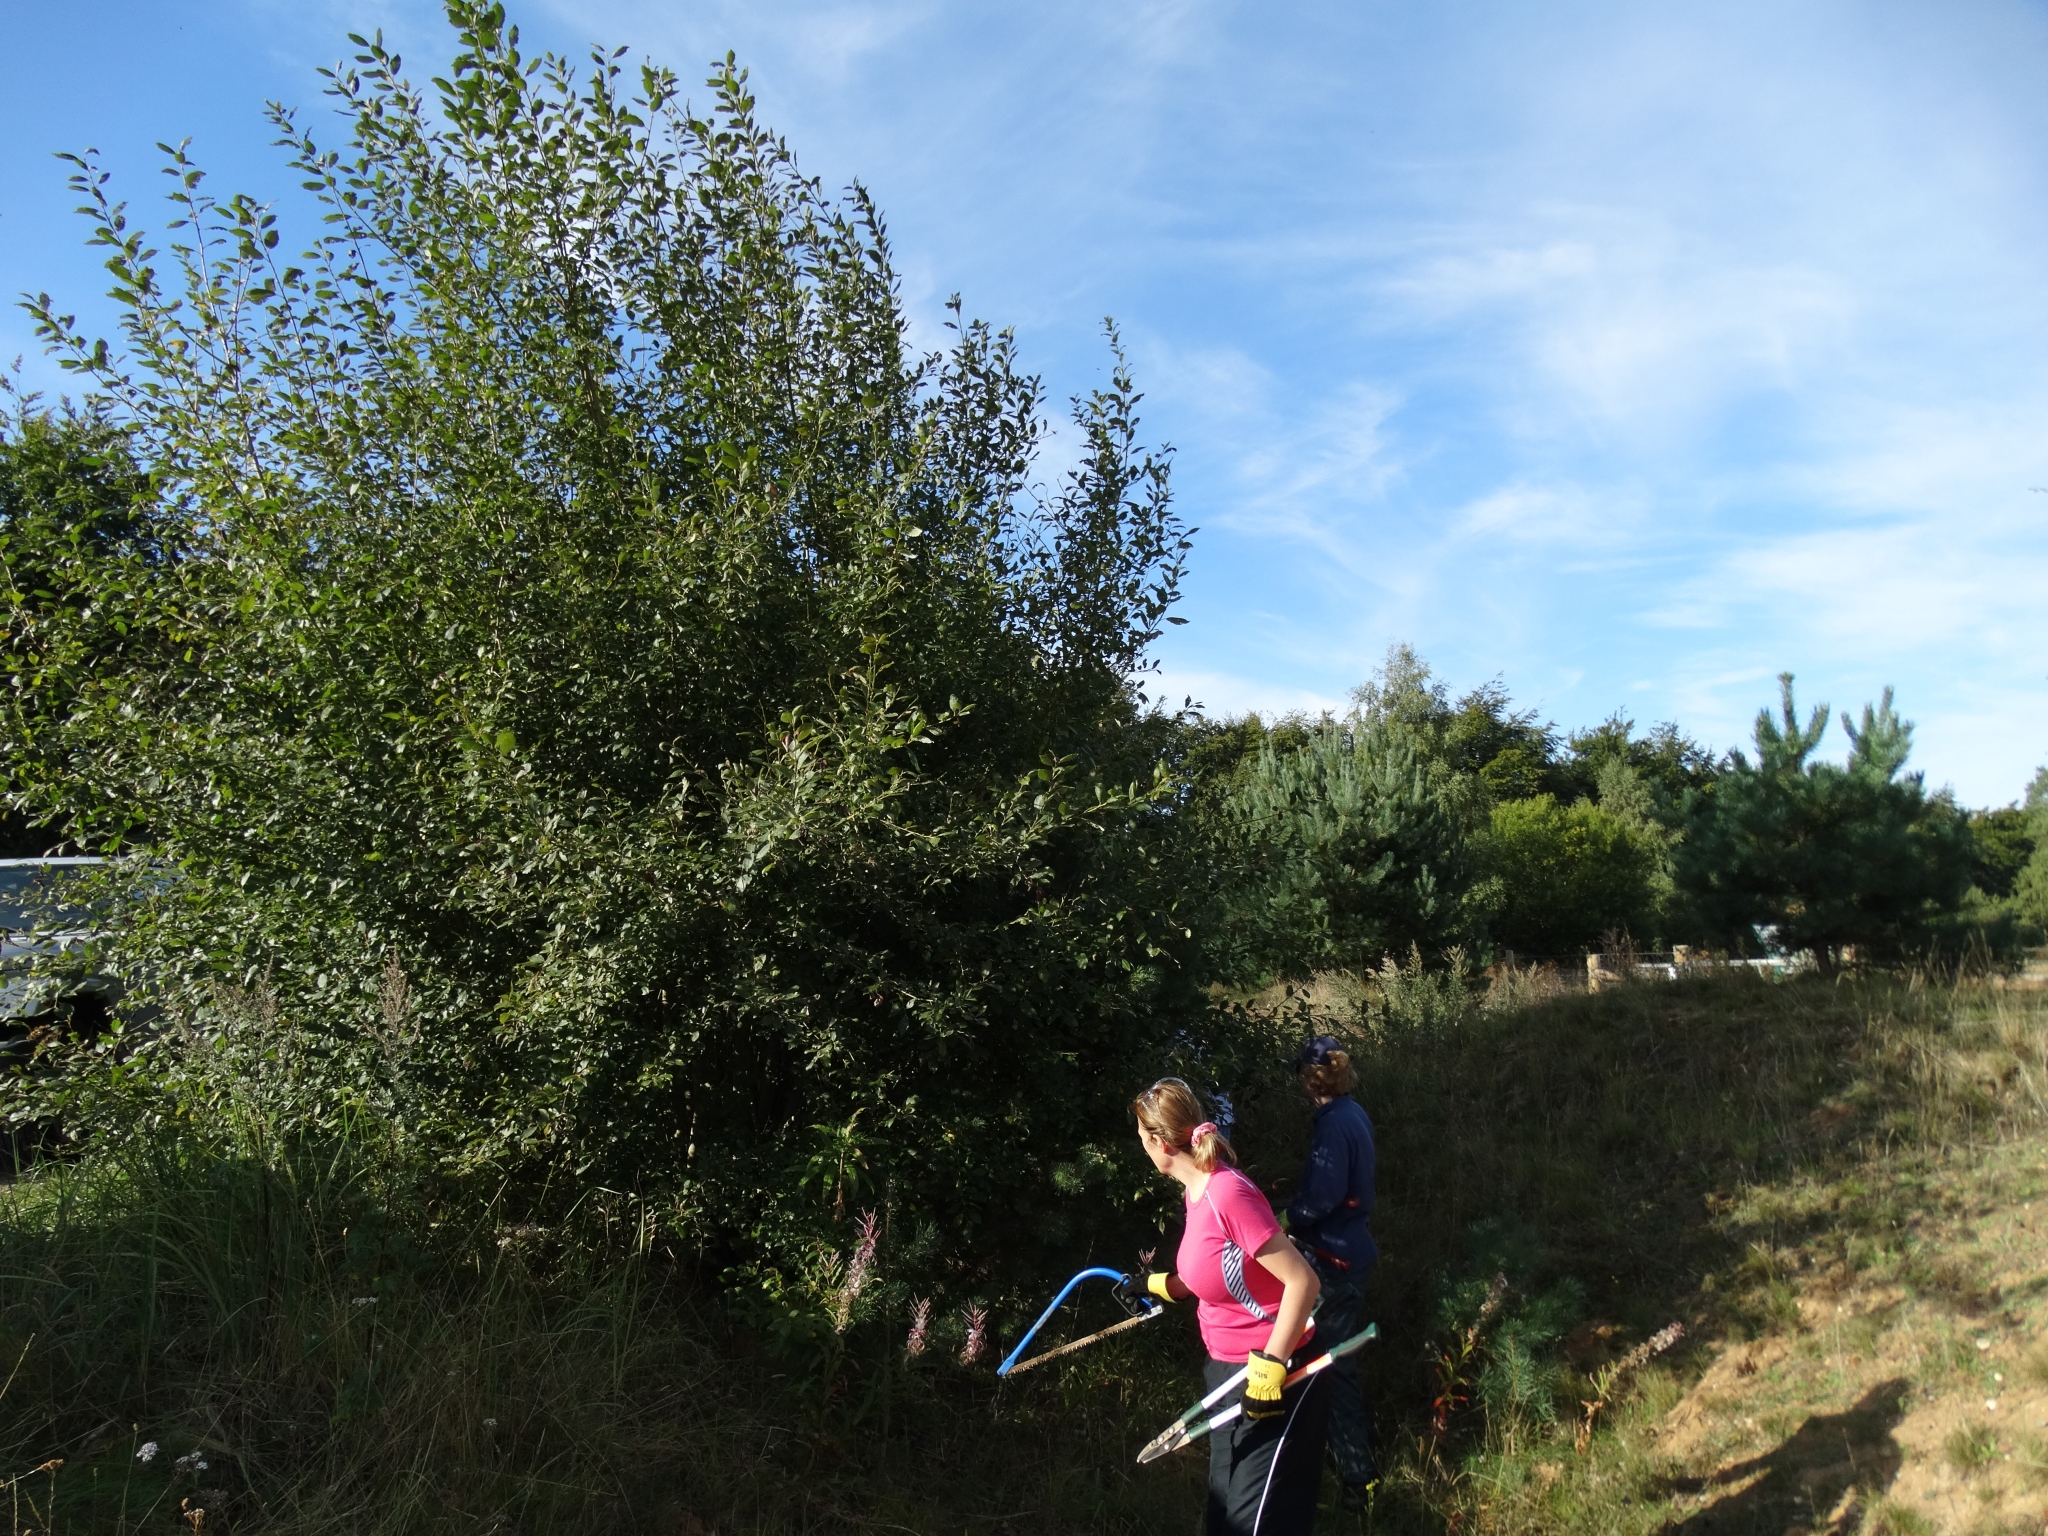 A photo from the FoTF Conservation Event - September 2019 - Scrub Clearance at Cranwich Camp : A volunteer apporaches a tree with a saw and loppers